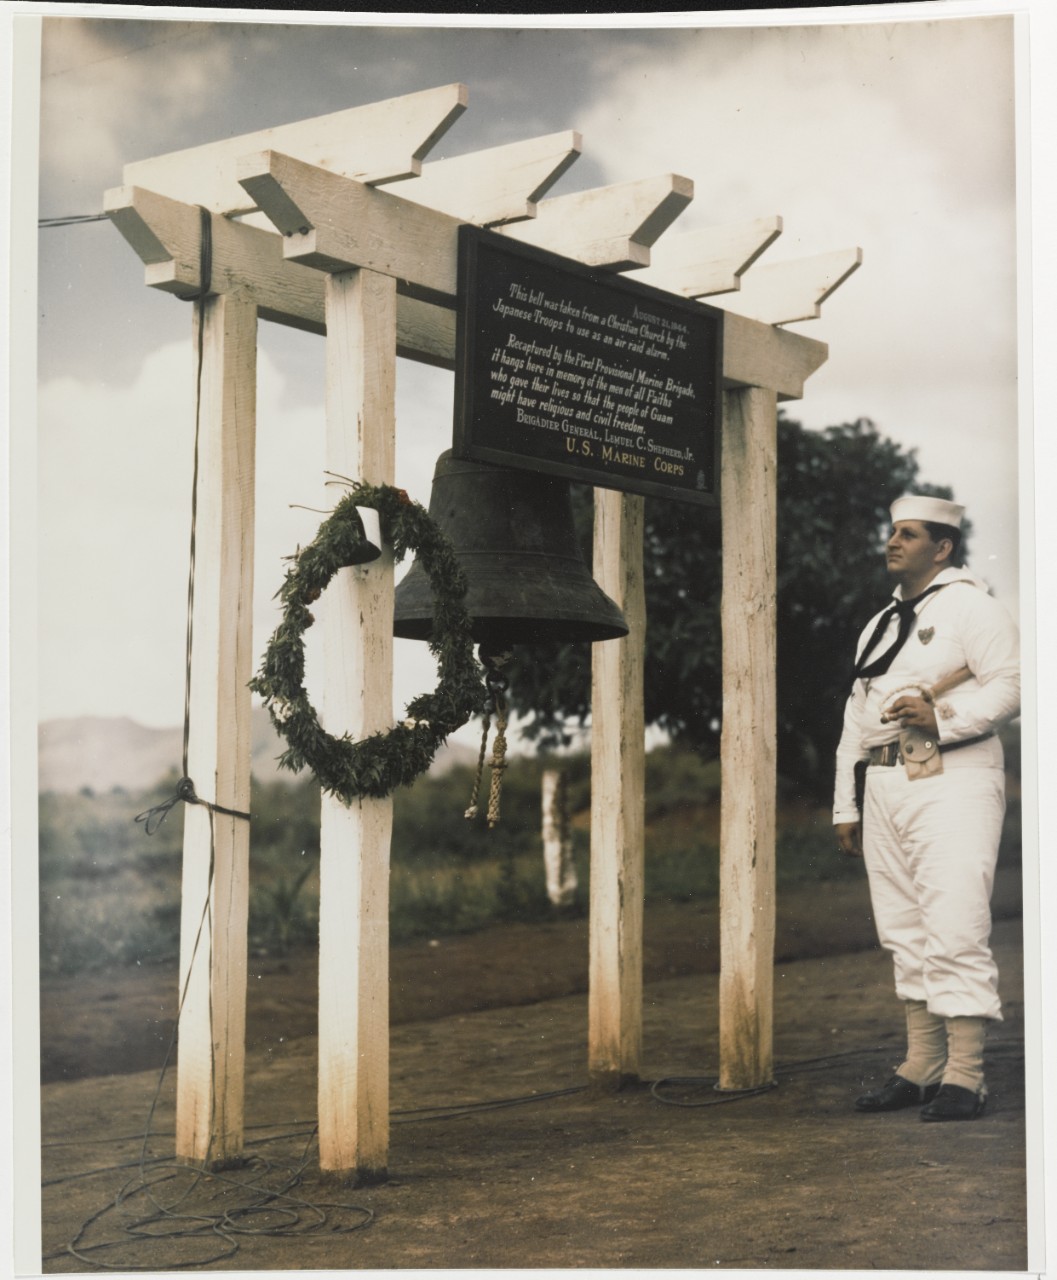 Agat Cemetery, Guam. Cox. Mike F. Venute, USN, stands beside the cemetery bell, 30 May 1945